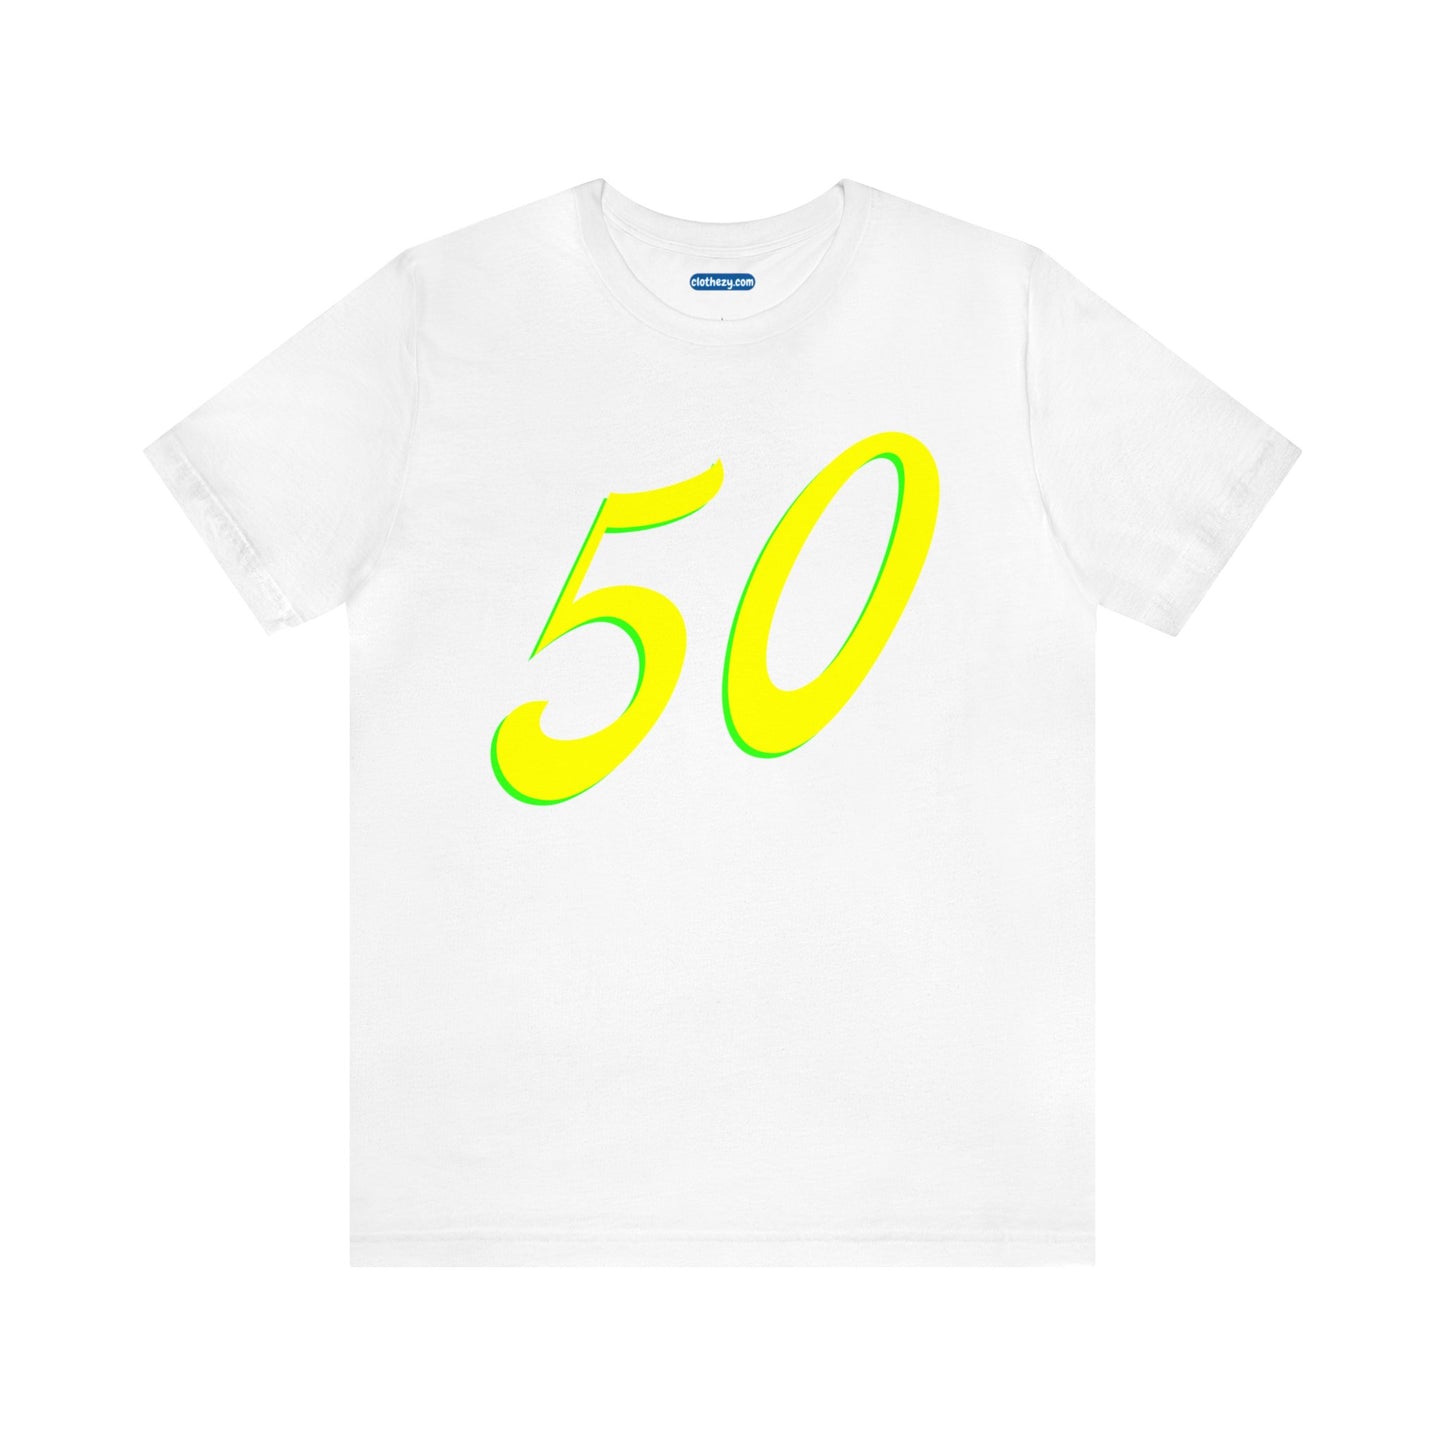 Number 50 Design - Soft Cotton Tee for birthdays and celebrations, Gift for friends and family, Multiple Options by clothezy.com in White Size Small - Buy Now